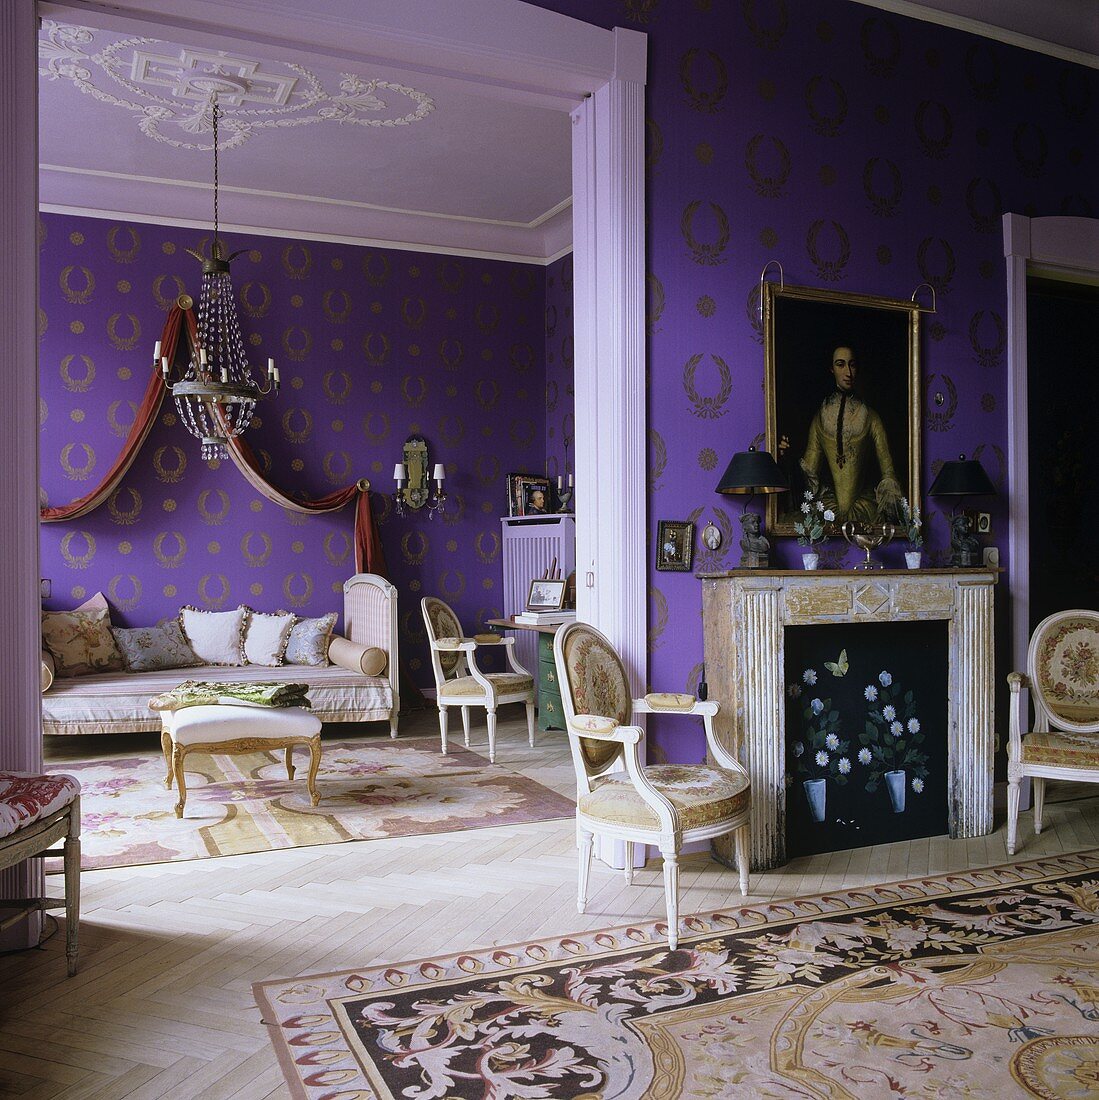 A fireplace room with an open doorway into a living room with purple wallpaper with a gold pattern